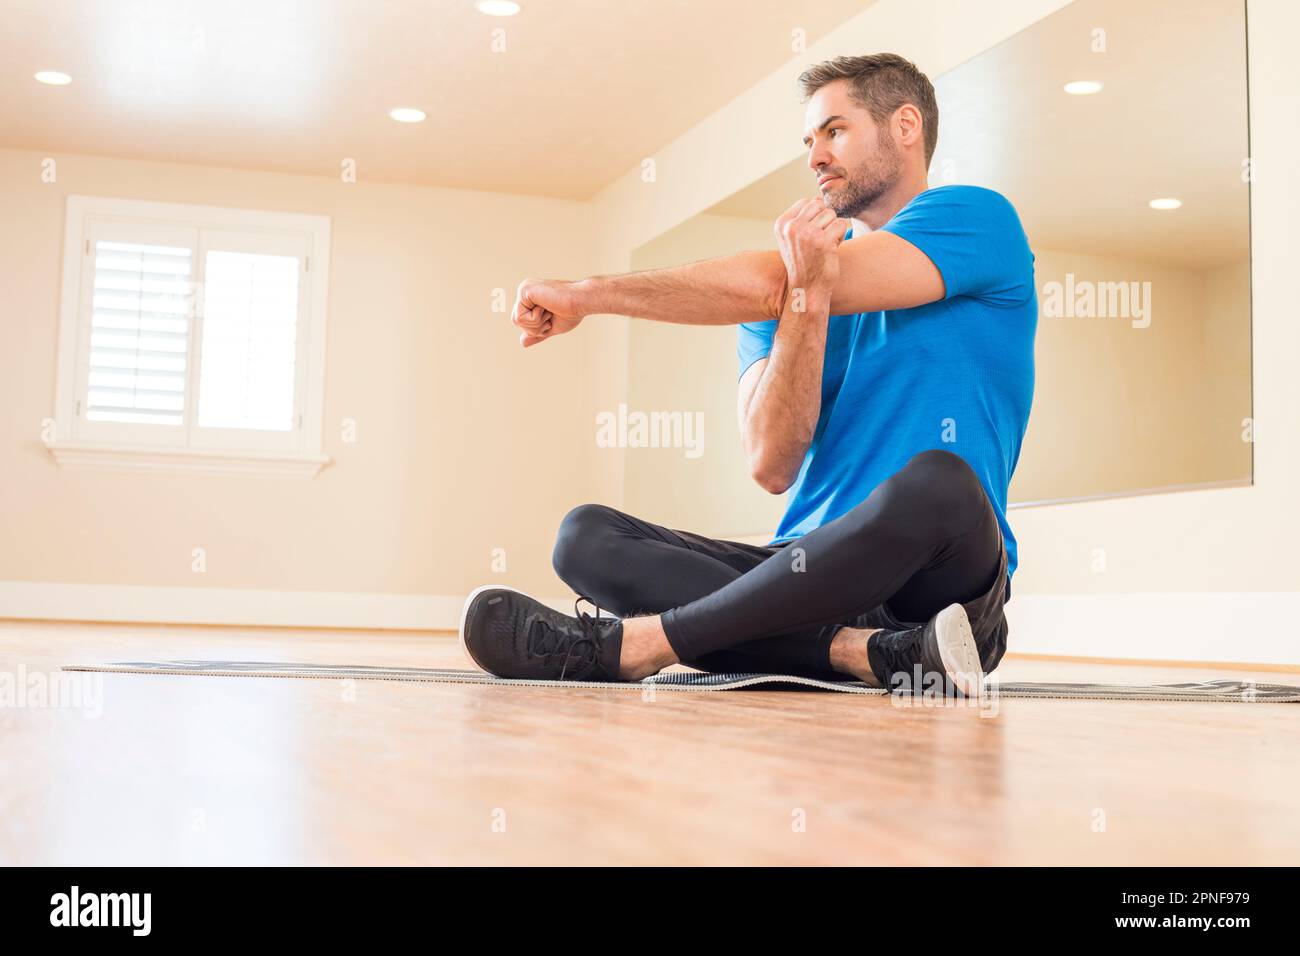 Man sitting on floor and stretching arm Stock Photo